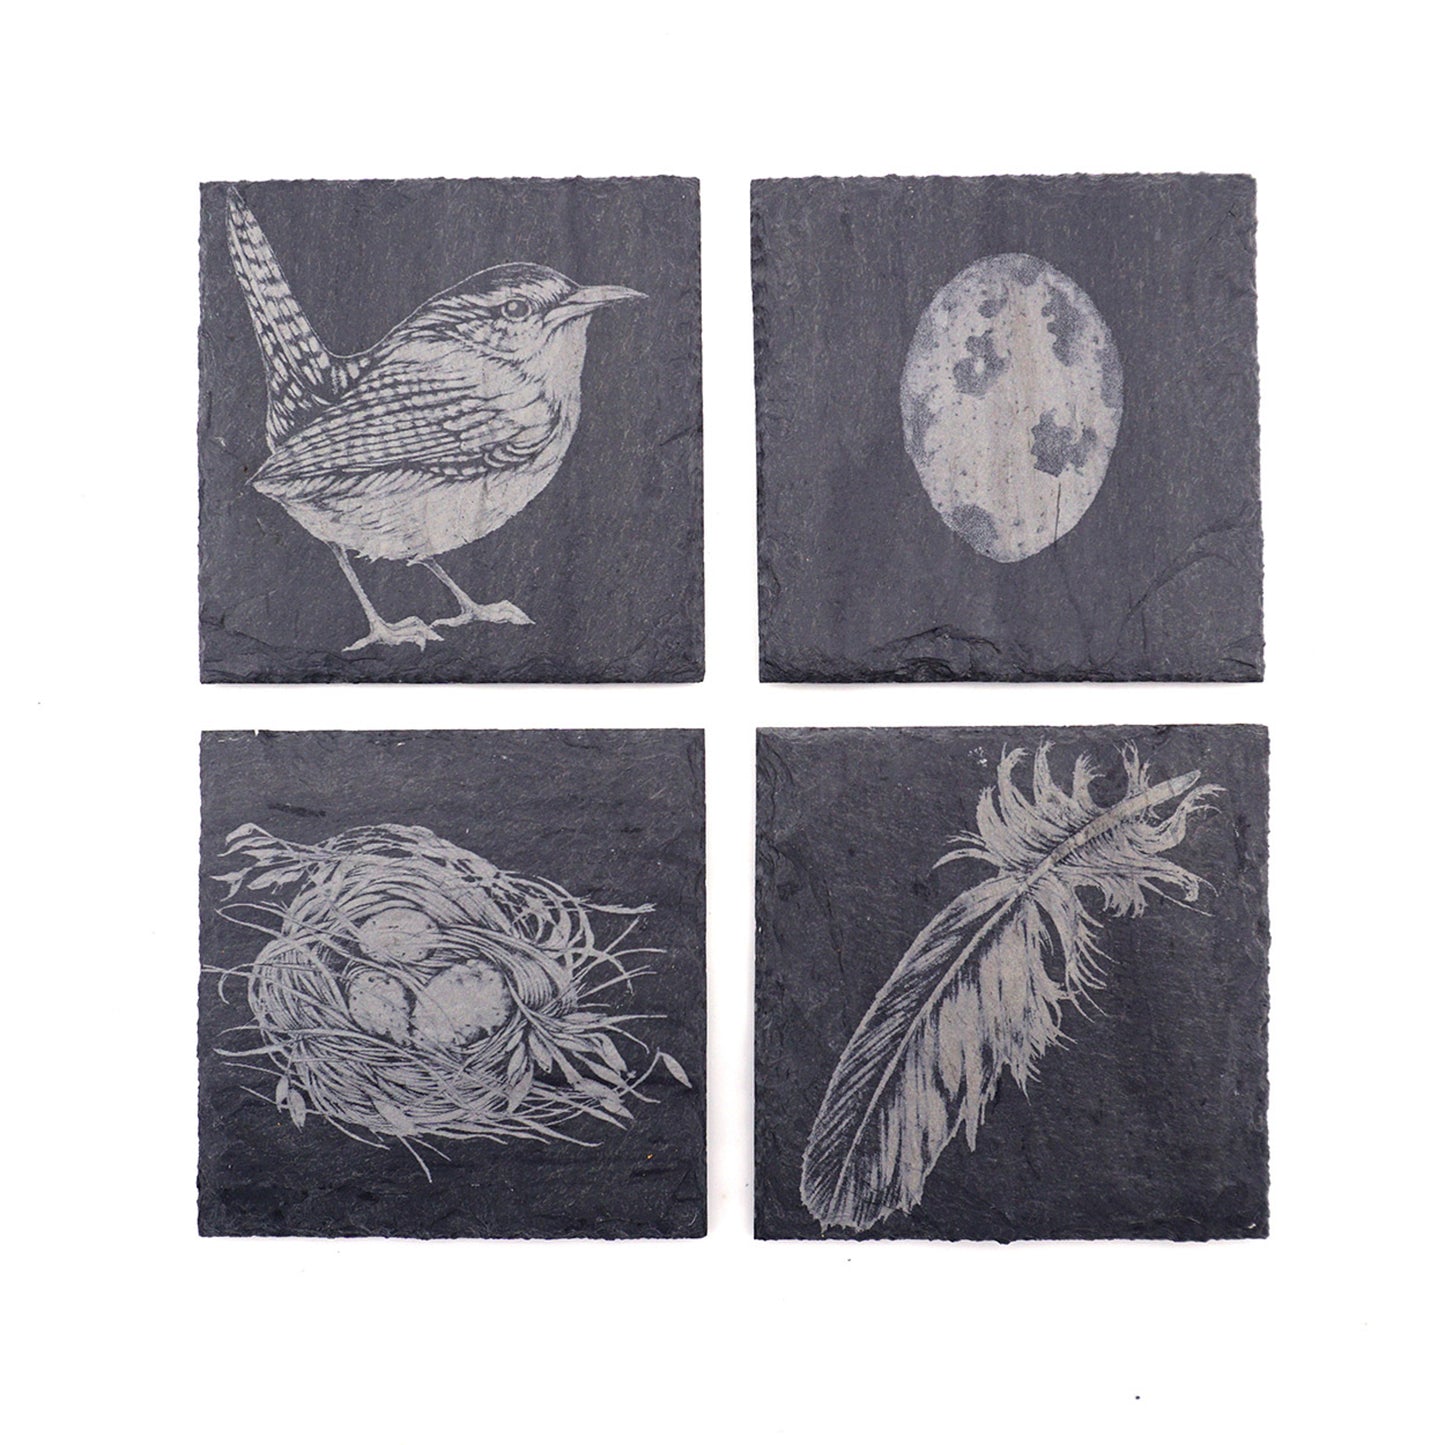 Laura Zindel Slate Coasters - More designs available